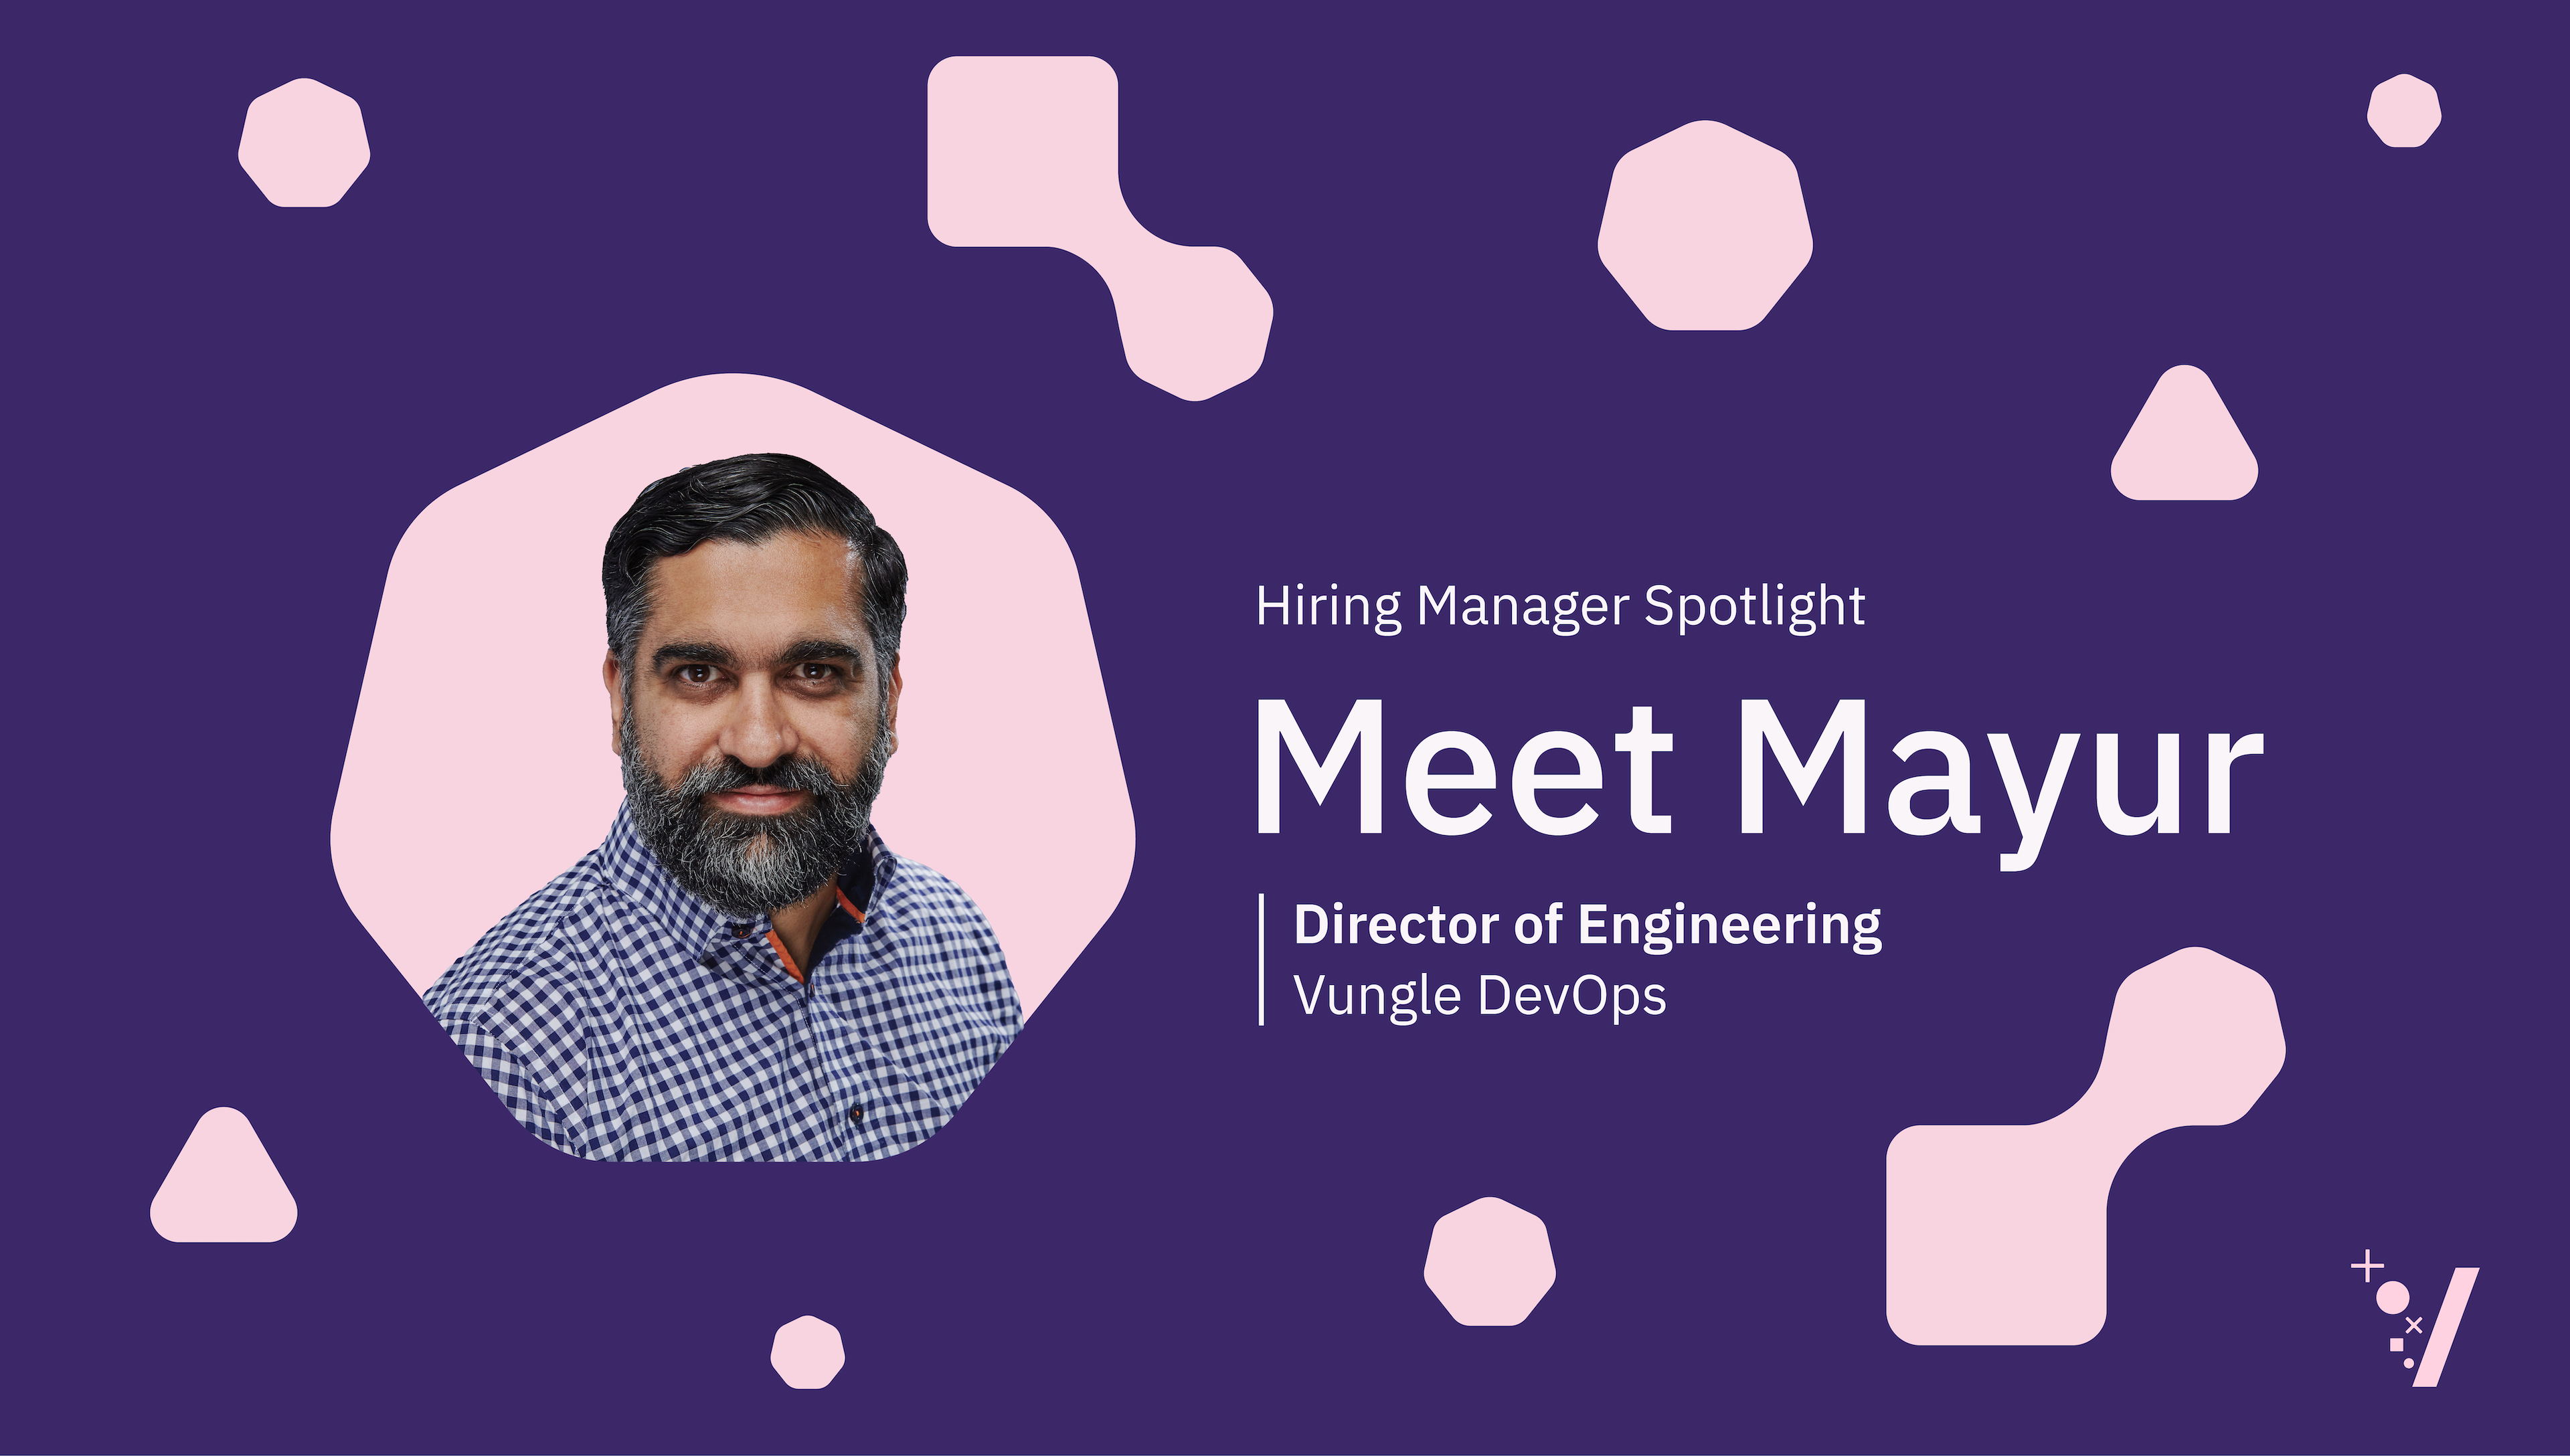 Meet Mayur and the DevOps Department